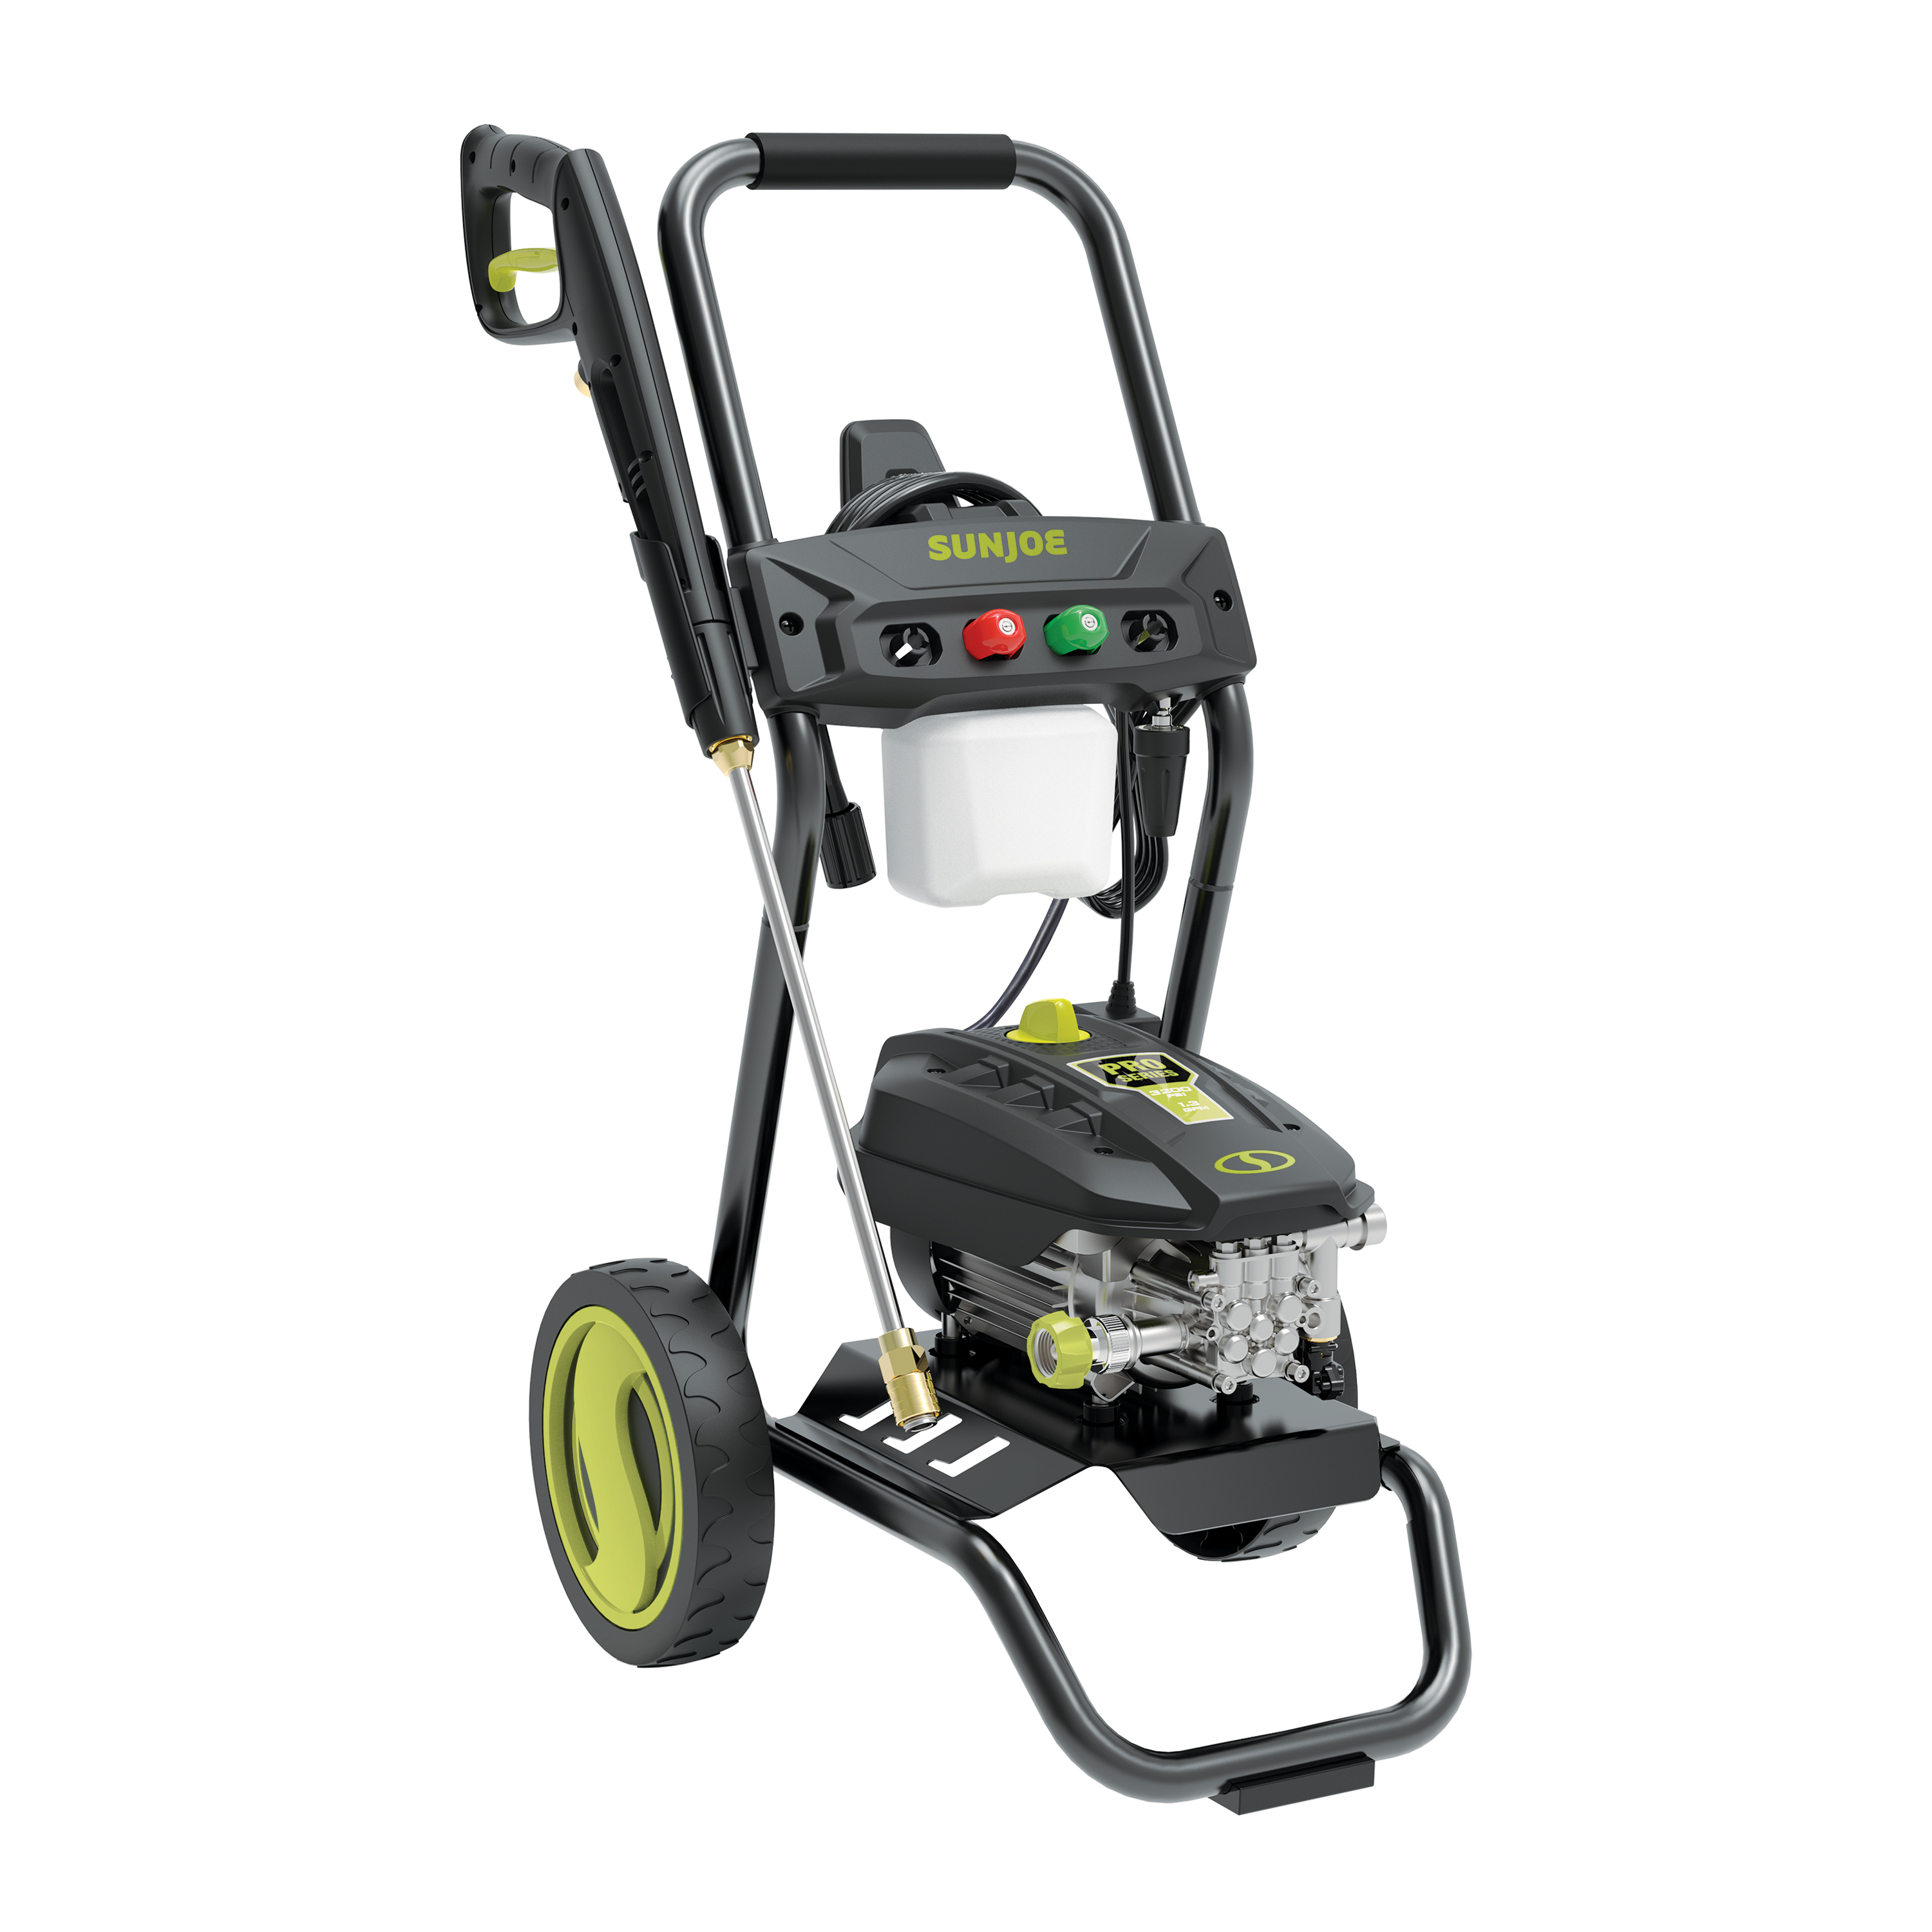 Sun Joe SPX8000-PRO High-Performance Brushless Induction Electric Pressure Washer W/ Steel Reinforced Hose, Quick Connect + Turbo Nozzles, & Metal Lance - image 4 of 10